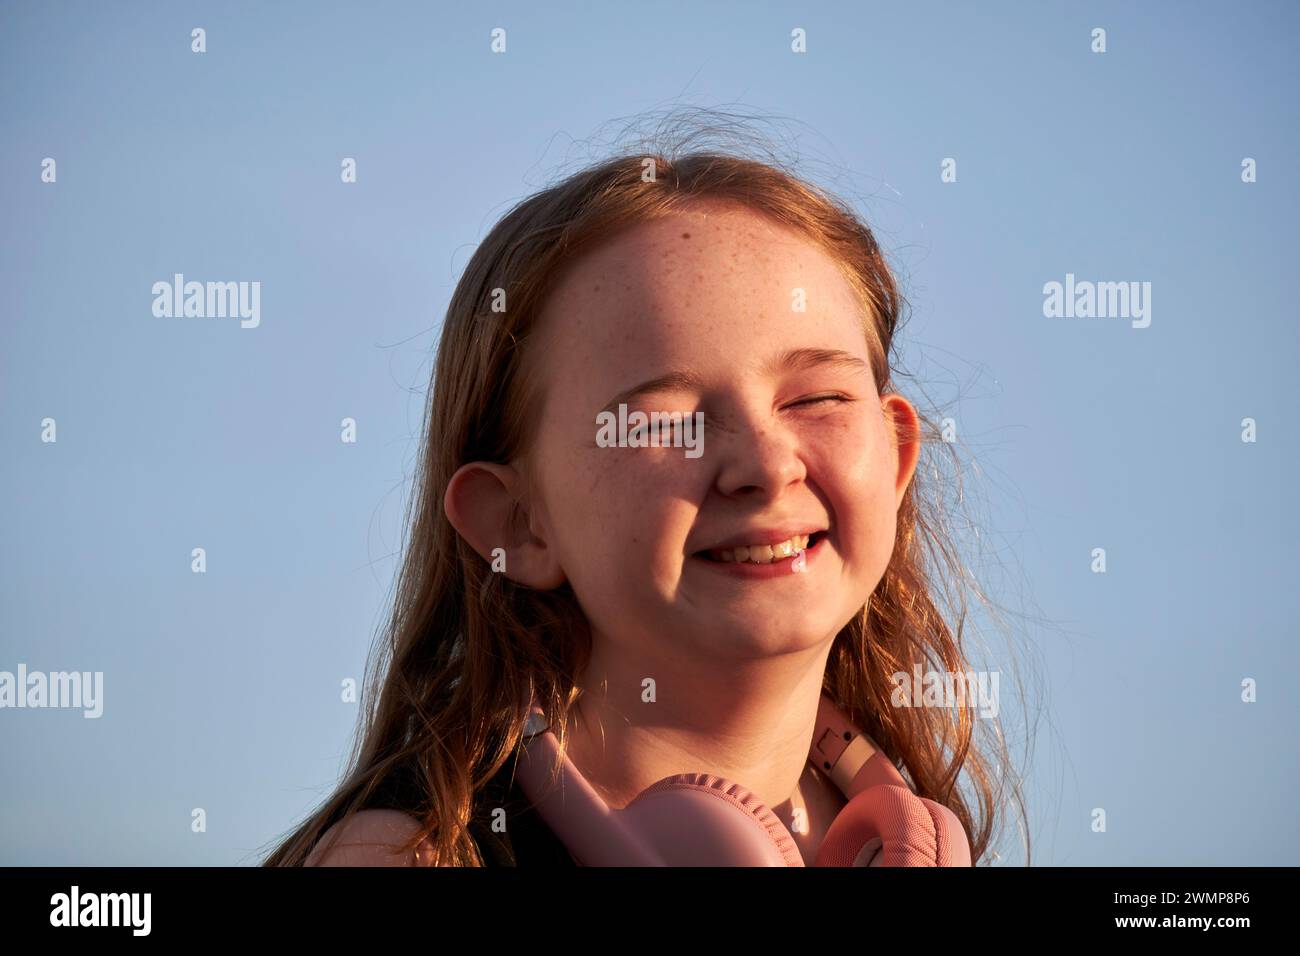 young 10 year old girl smiling laughing at sunset Lanzarote, Canary Islands, spain Stock Photo